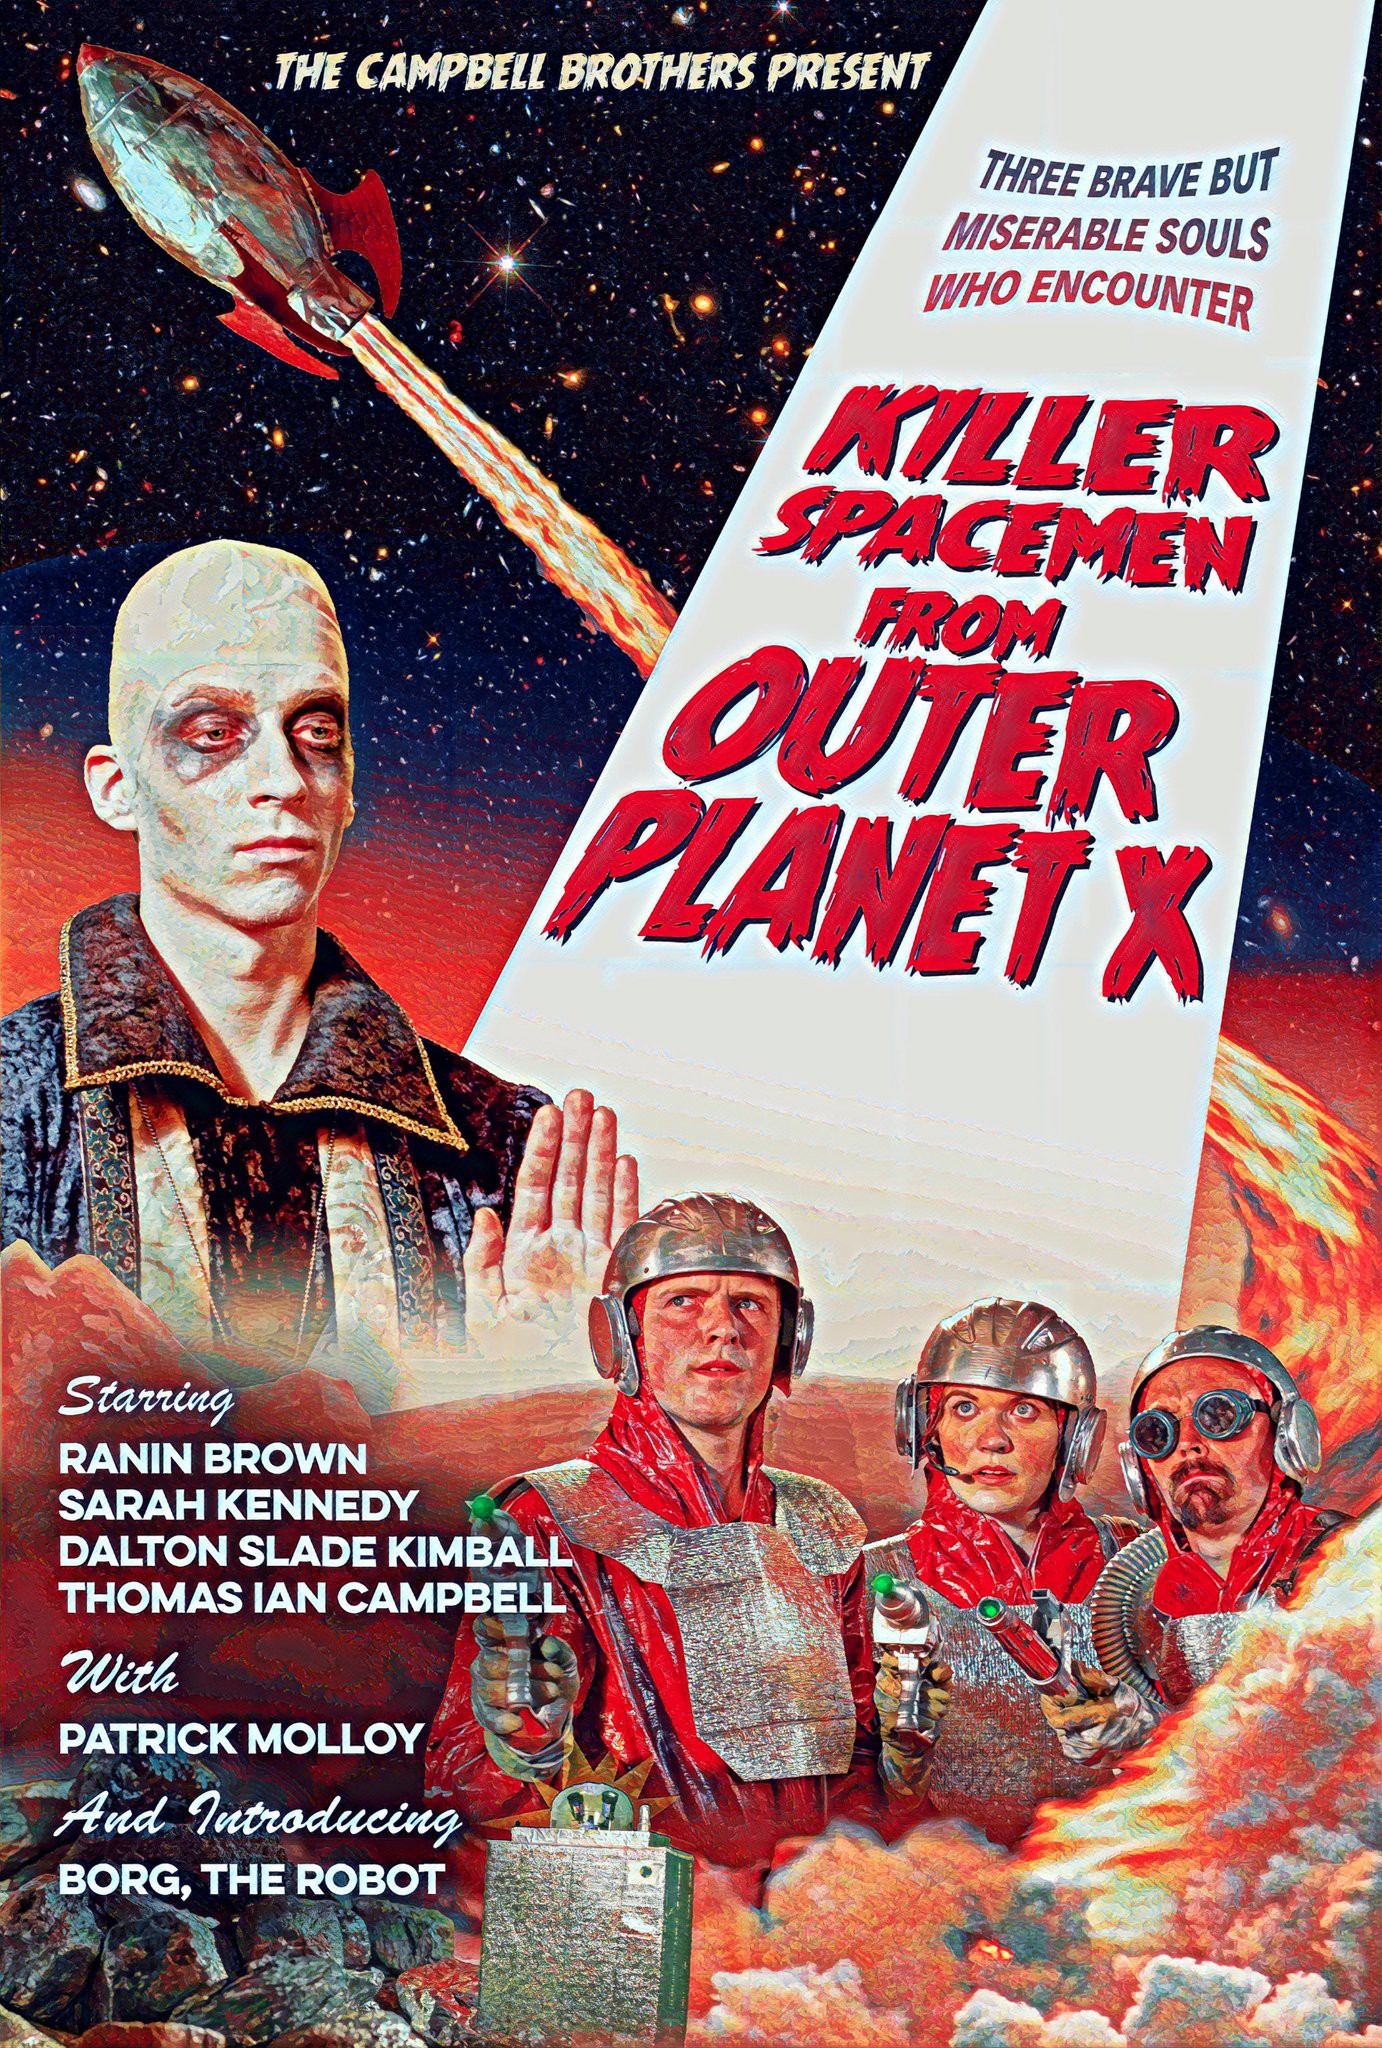 Mega Sized Movie Poster Image for Killer Spacemen from Outer Planet X